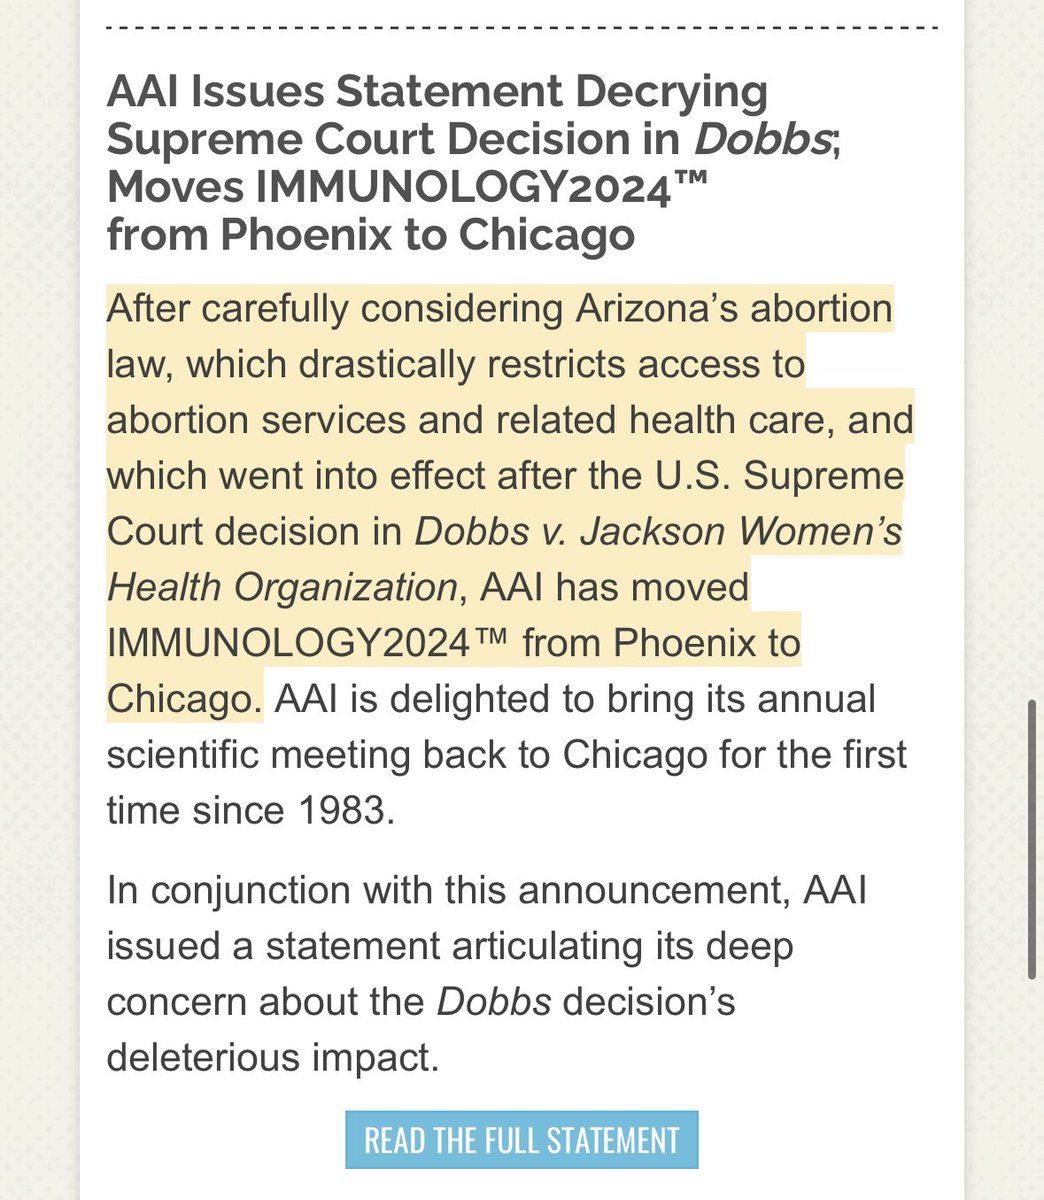 If you needed one more reason to regret not being an immunologist - The American Association of Immunologist MOVED  #Immunology2024 from Phoenix to Chicago in response to Arizona’s Abortion Law. 
🙏🏻 @ImmunologyAAI leaders/members!! 
Let’s all be #LikeAAI  
aai.org/AAISite/media/…